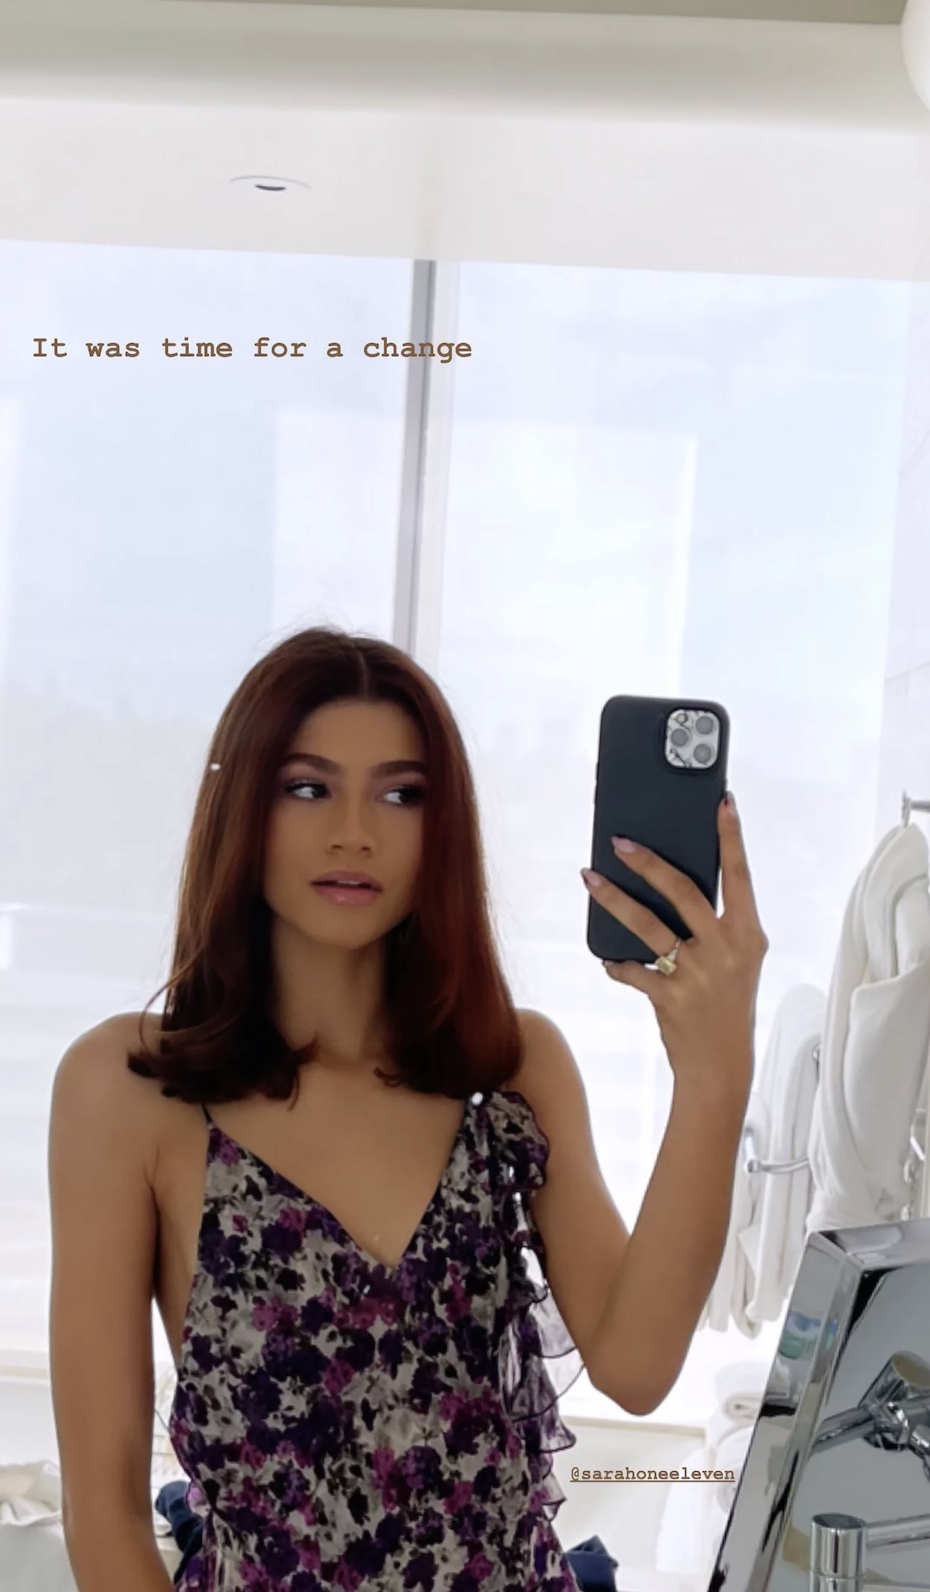 A mirror selfie of Zendaya with shorter red hair and wearing a ring while holding her phone